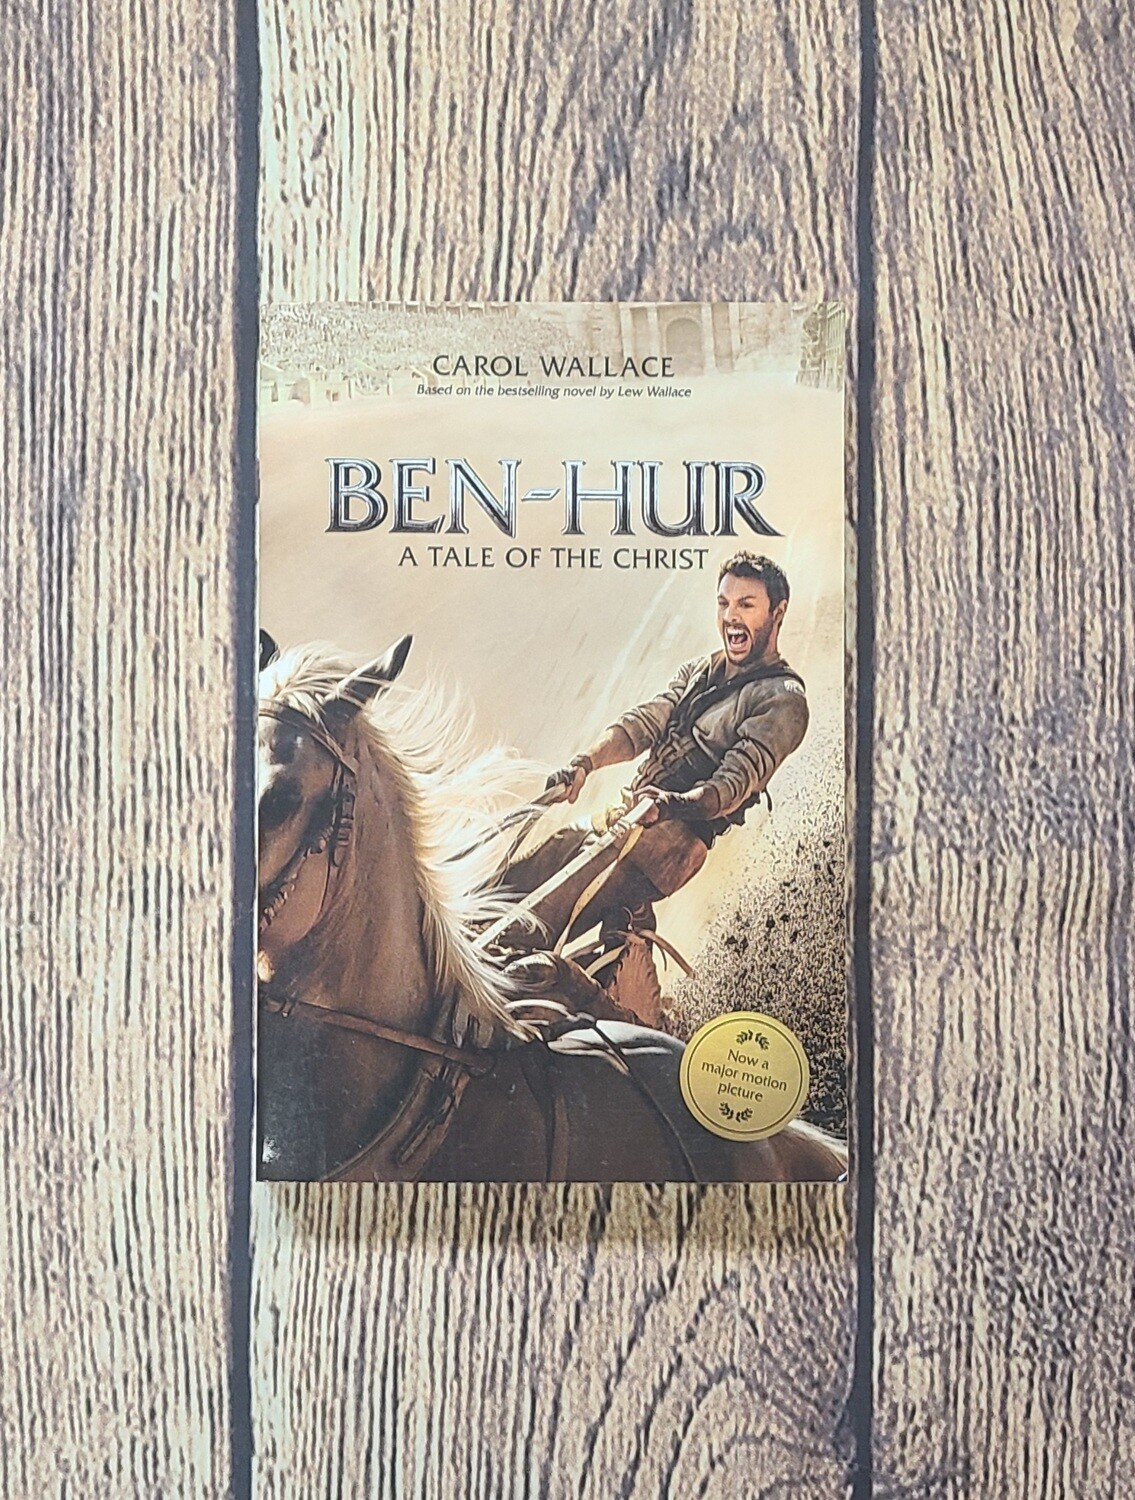 Ben-Hur: A Tale of the Christ by Lew Wallace and Carol Wallace